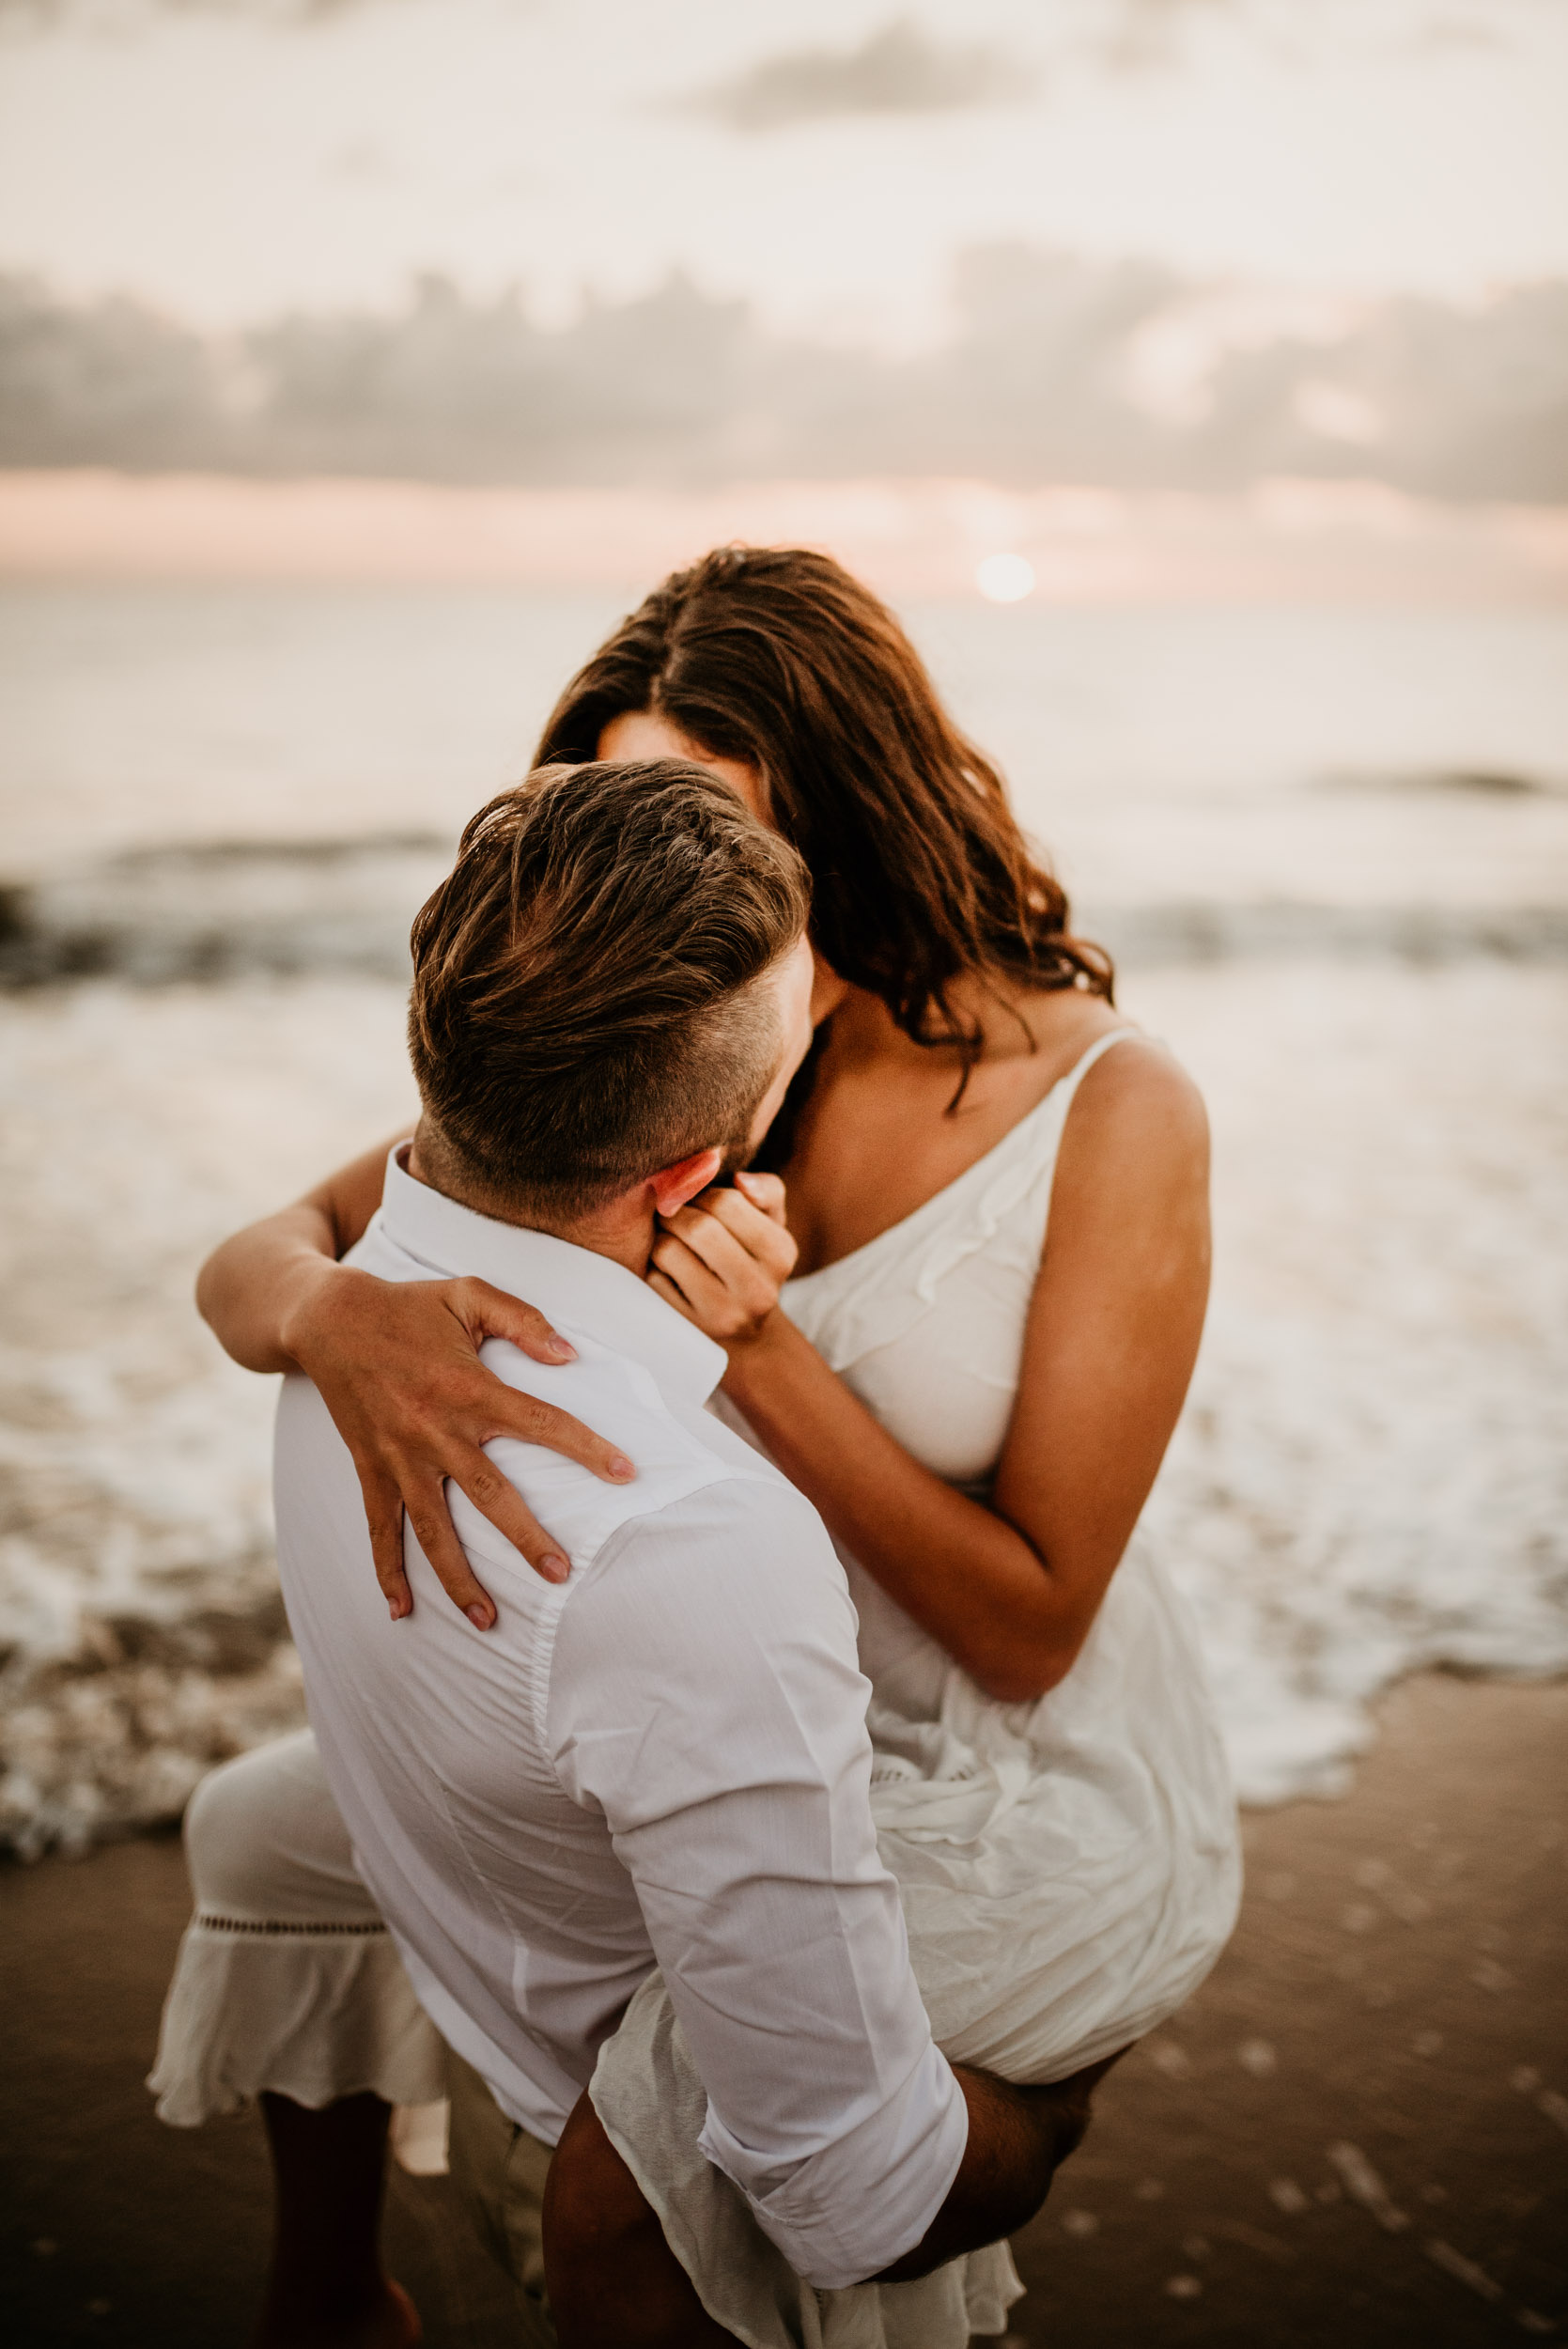 The Raw Photographer - Cairns Wedding Photographer - Engaged Engagement - Beach location - Candid Photography Queensland-7.jpg